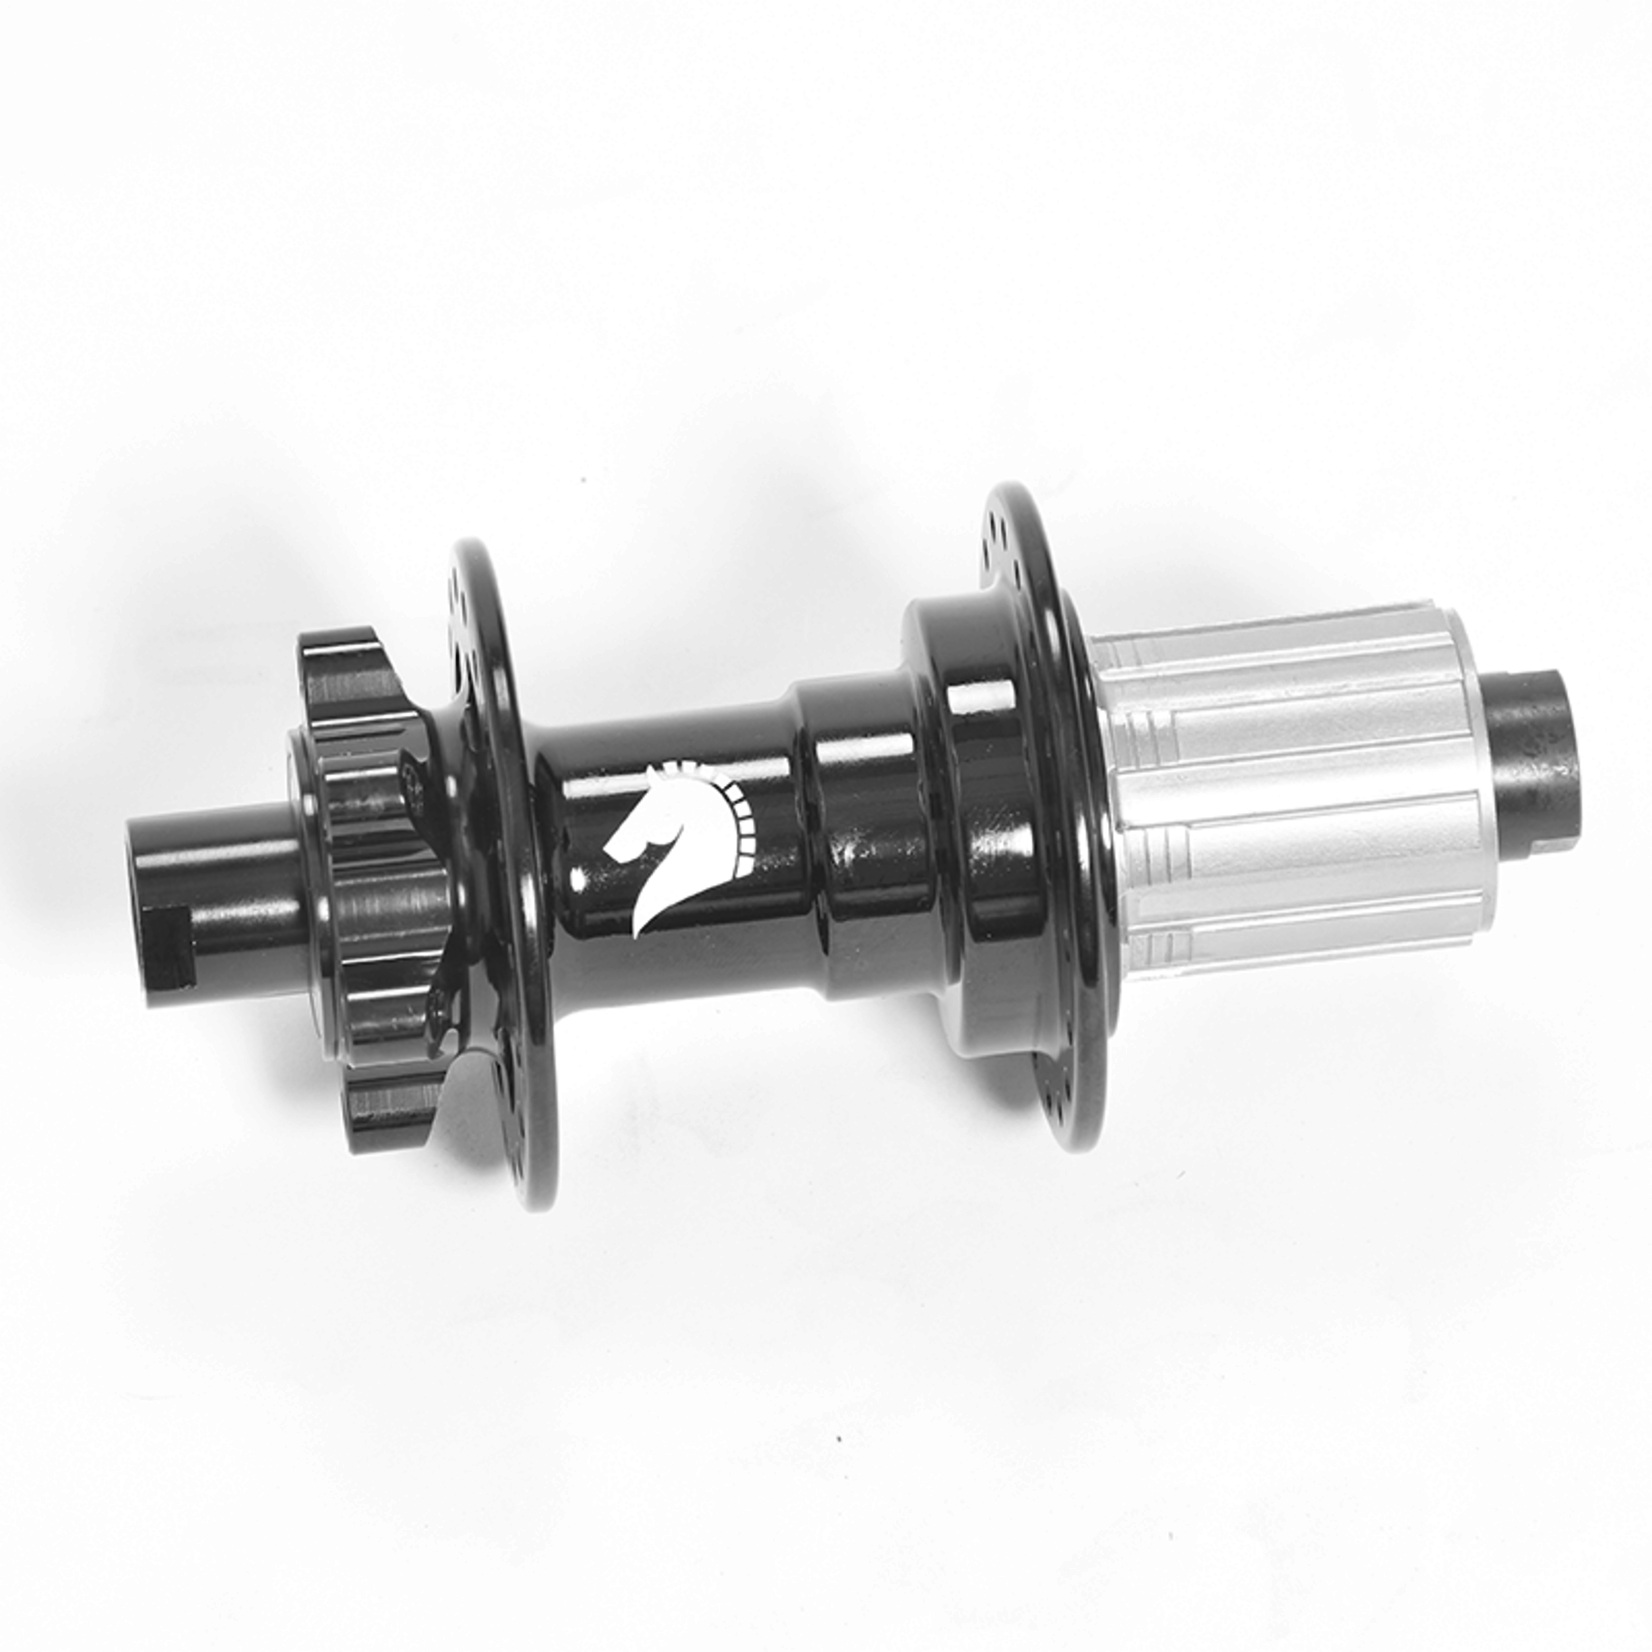 Clydesdale Rear Hub - 36 hole - BX207R